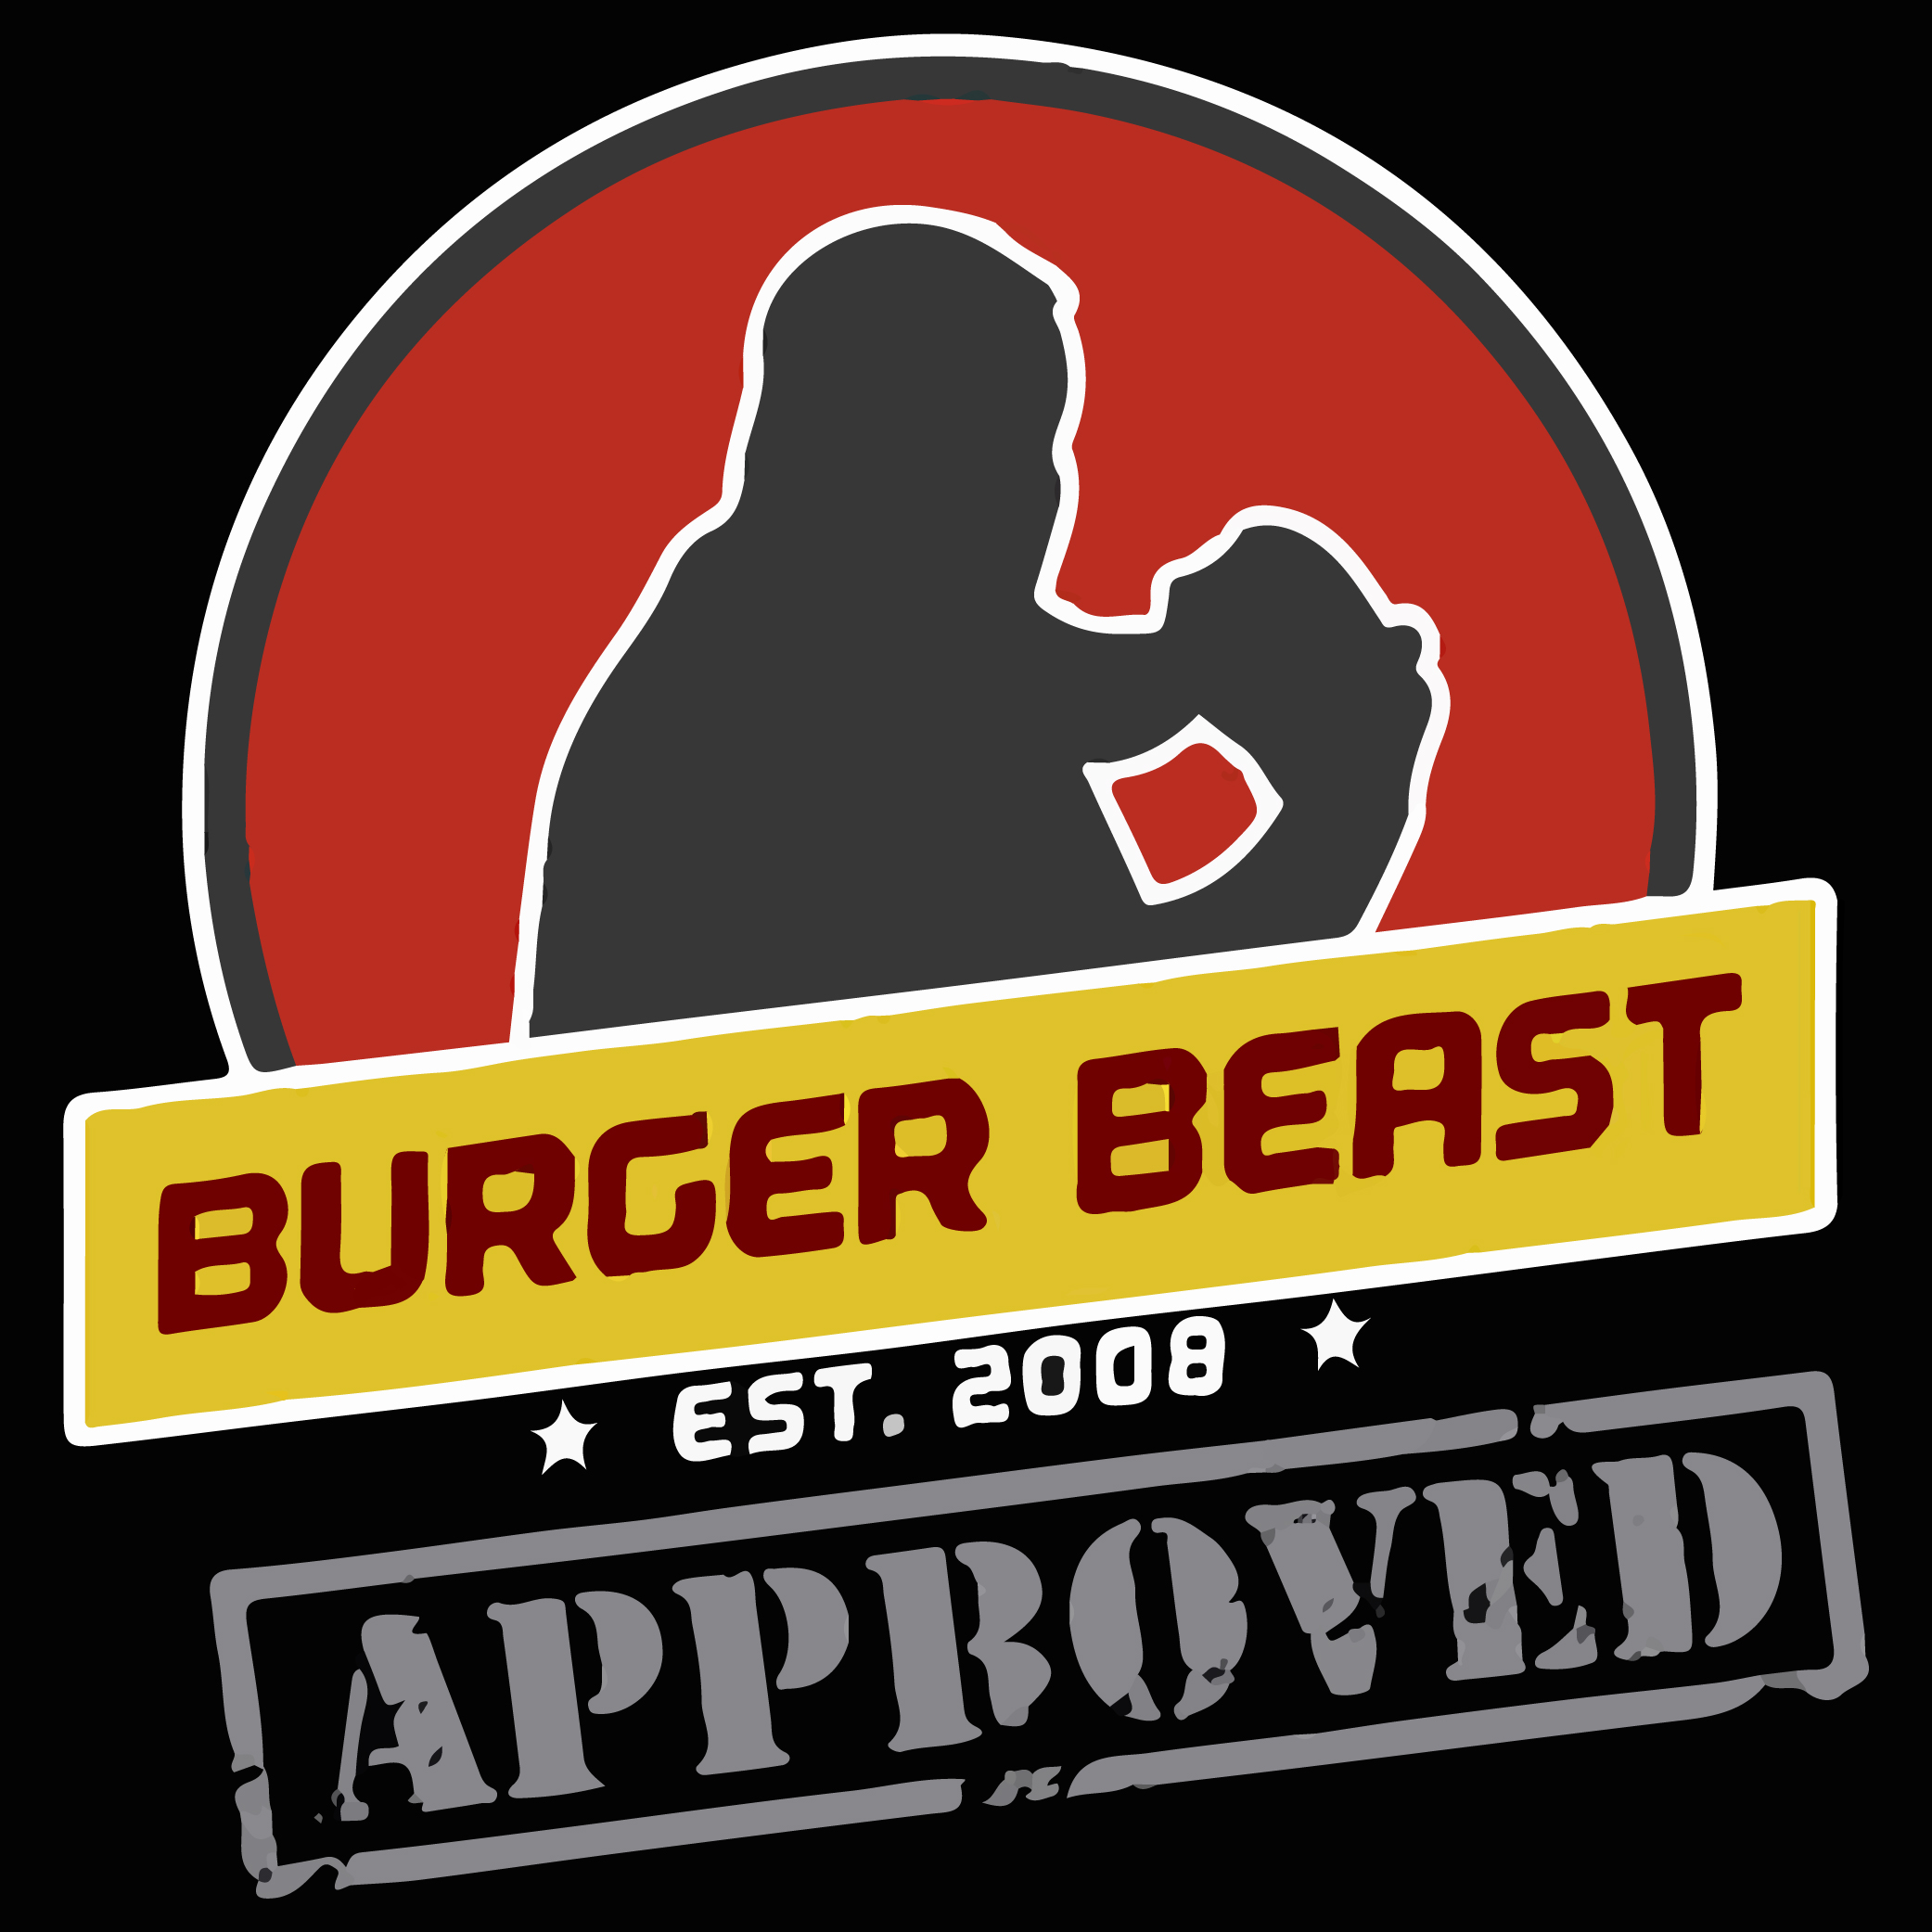 burger beast approved